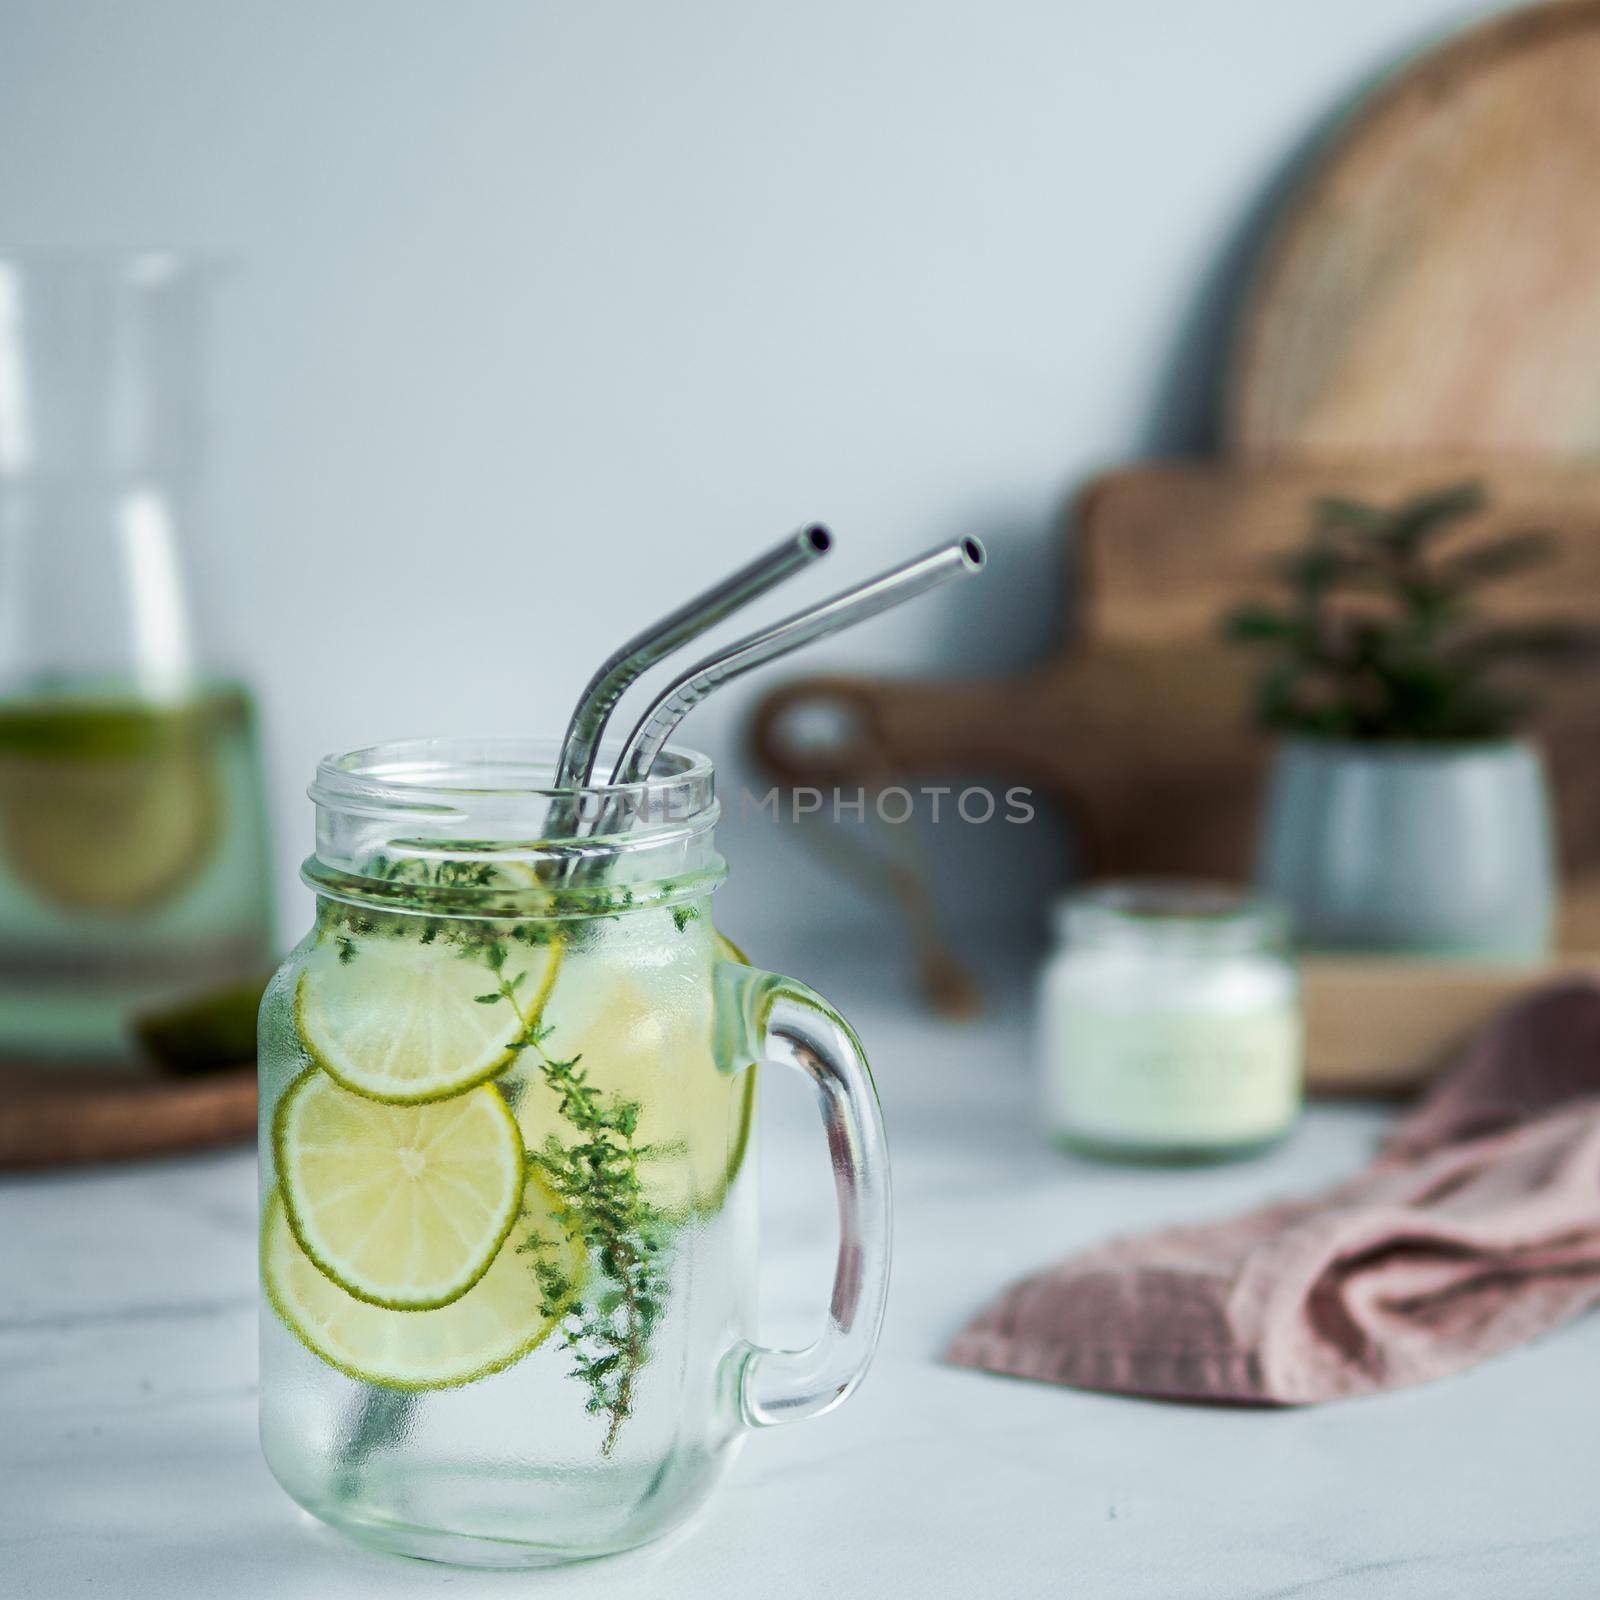 Cold drink in mason jar with metal straws on kitchen table. Lemonade or detox water with lime and thyme in glass jar wit metal straw indoor. Recyclable straws, zero waste concept